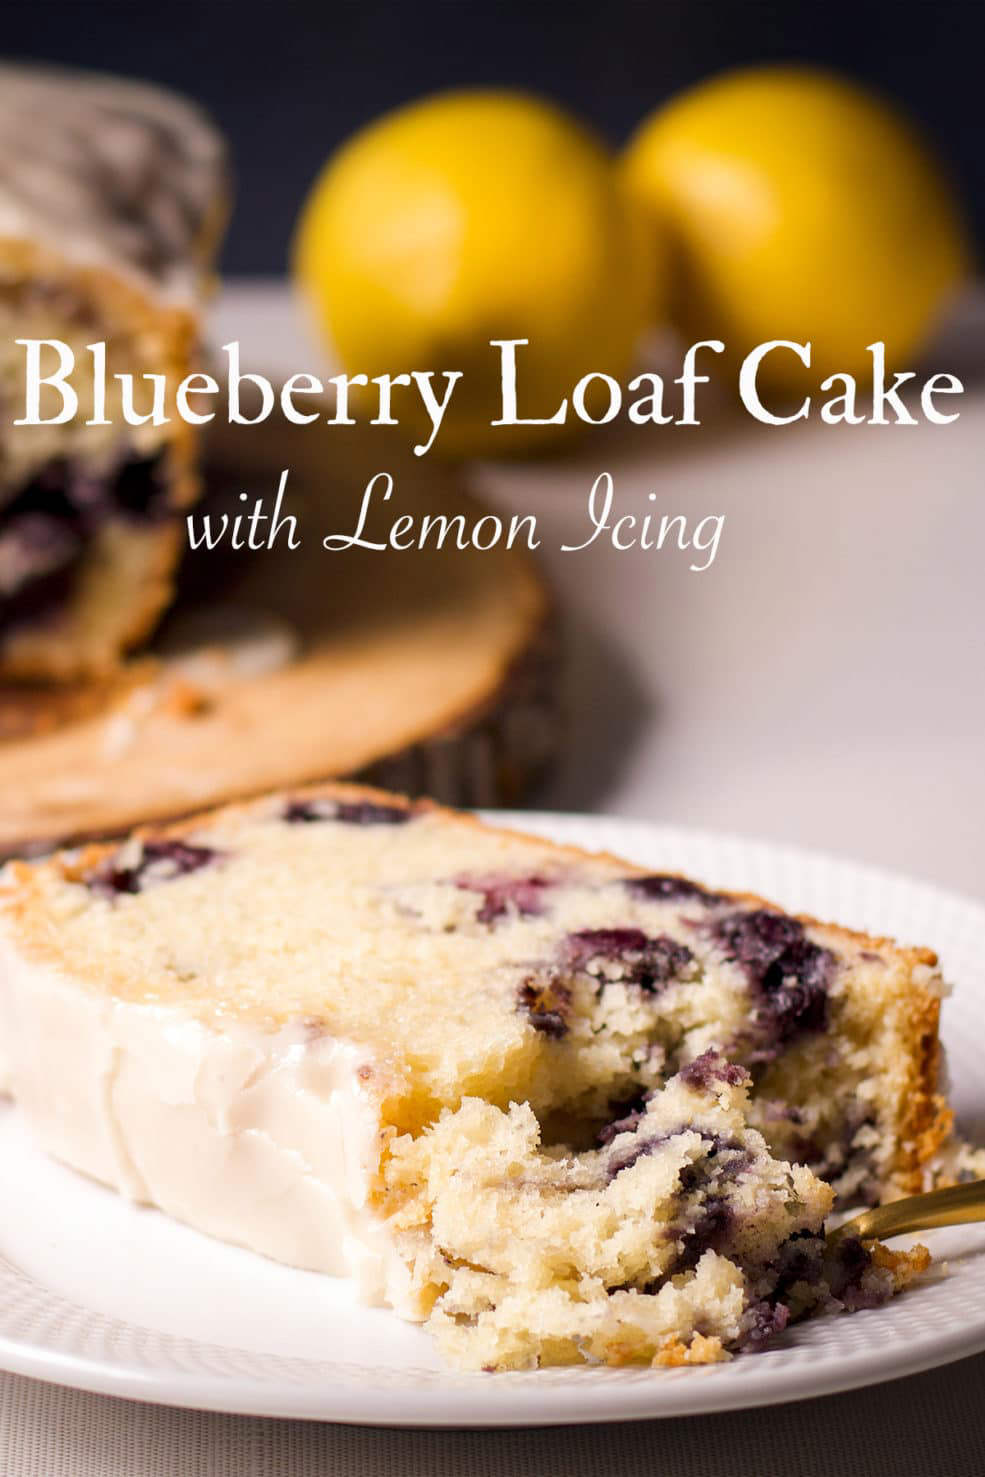 Blueberry Loaf Cake with Lemon or Vanilla Icing